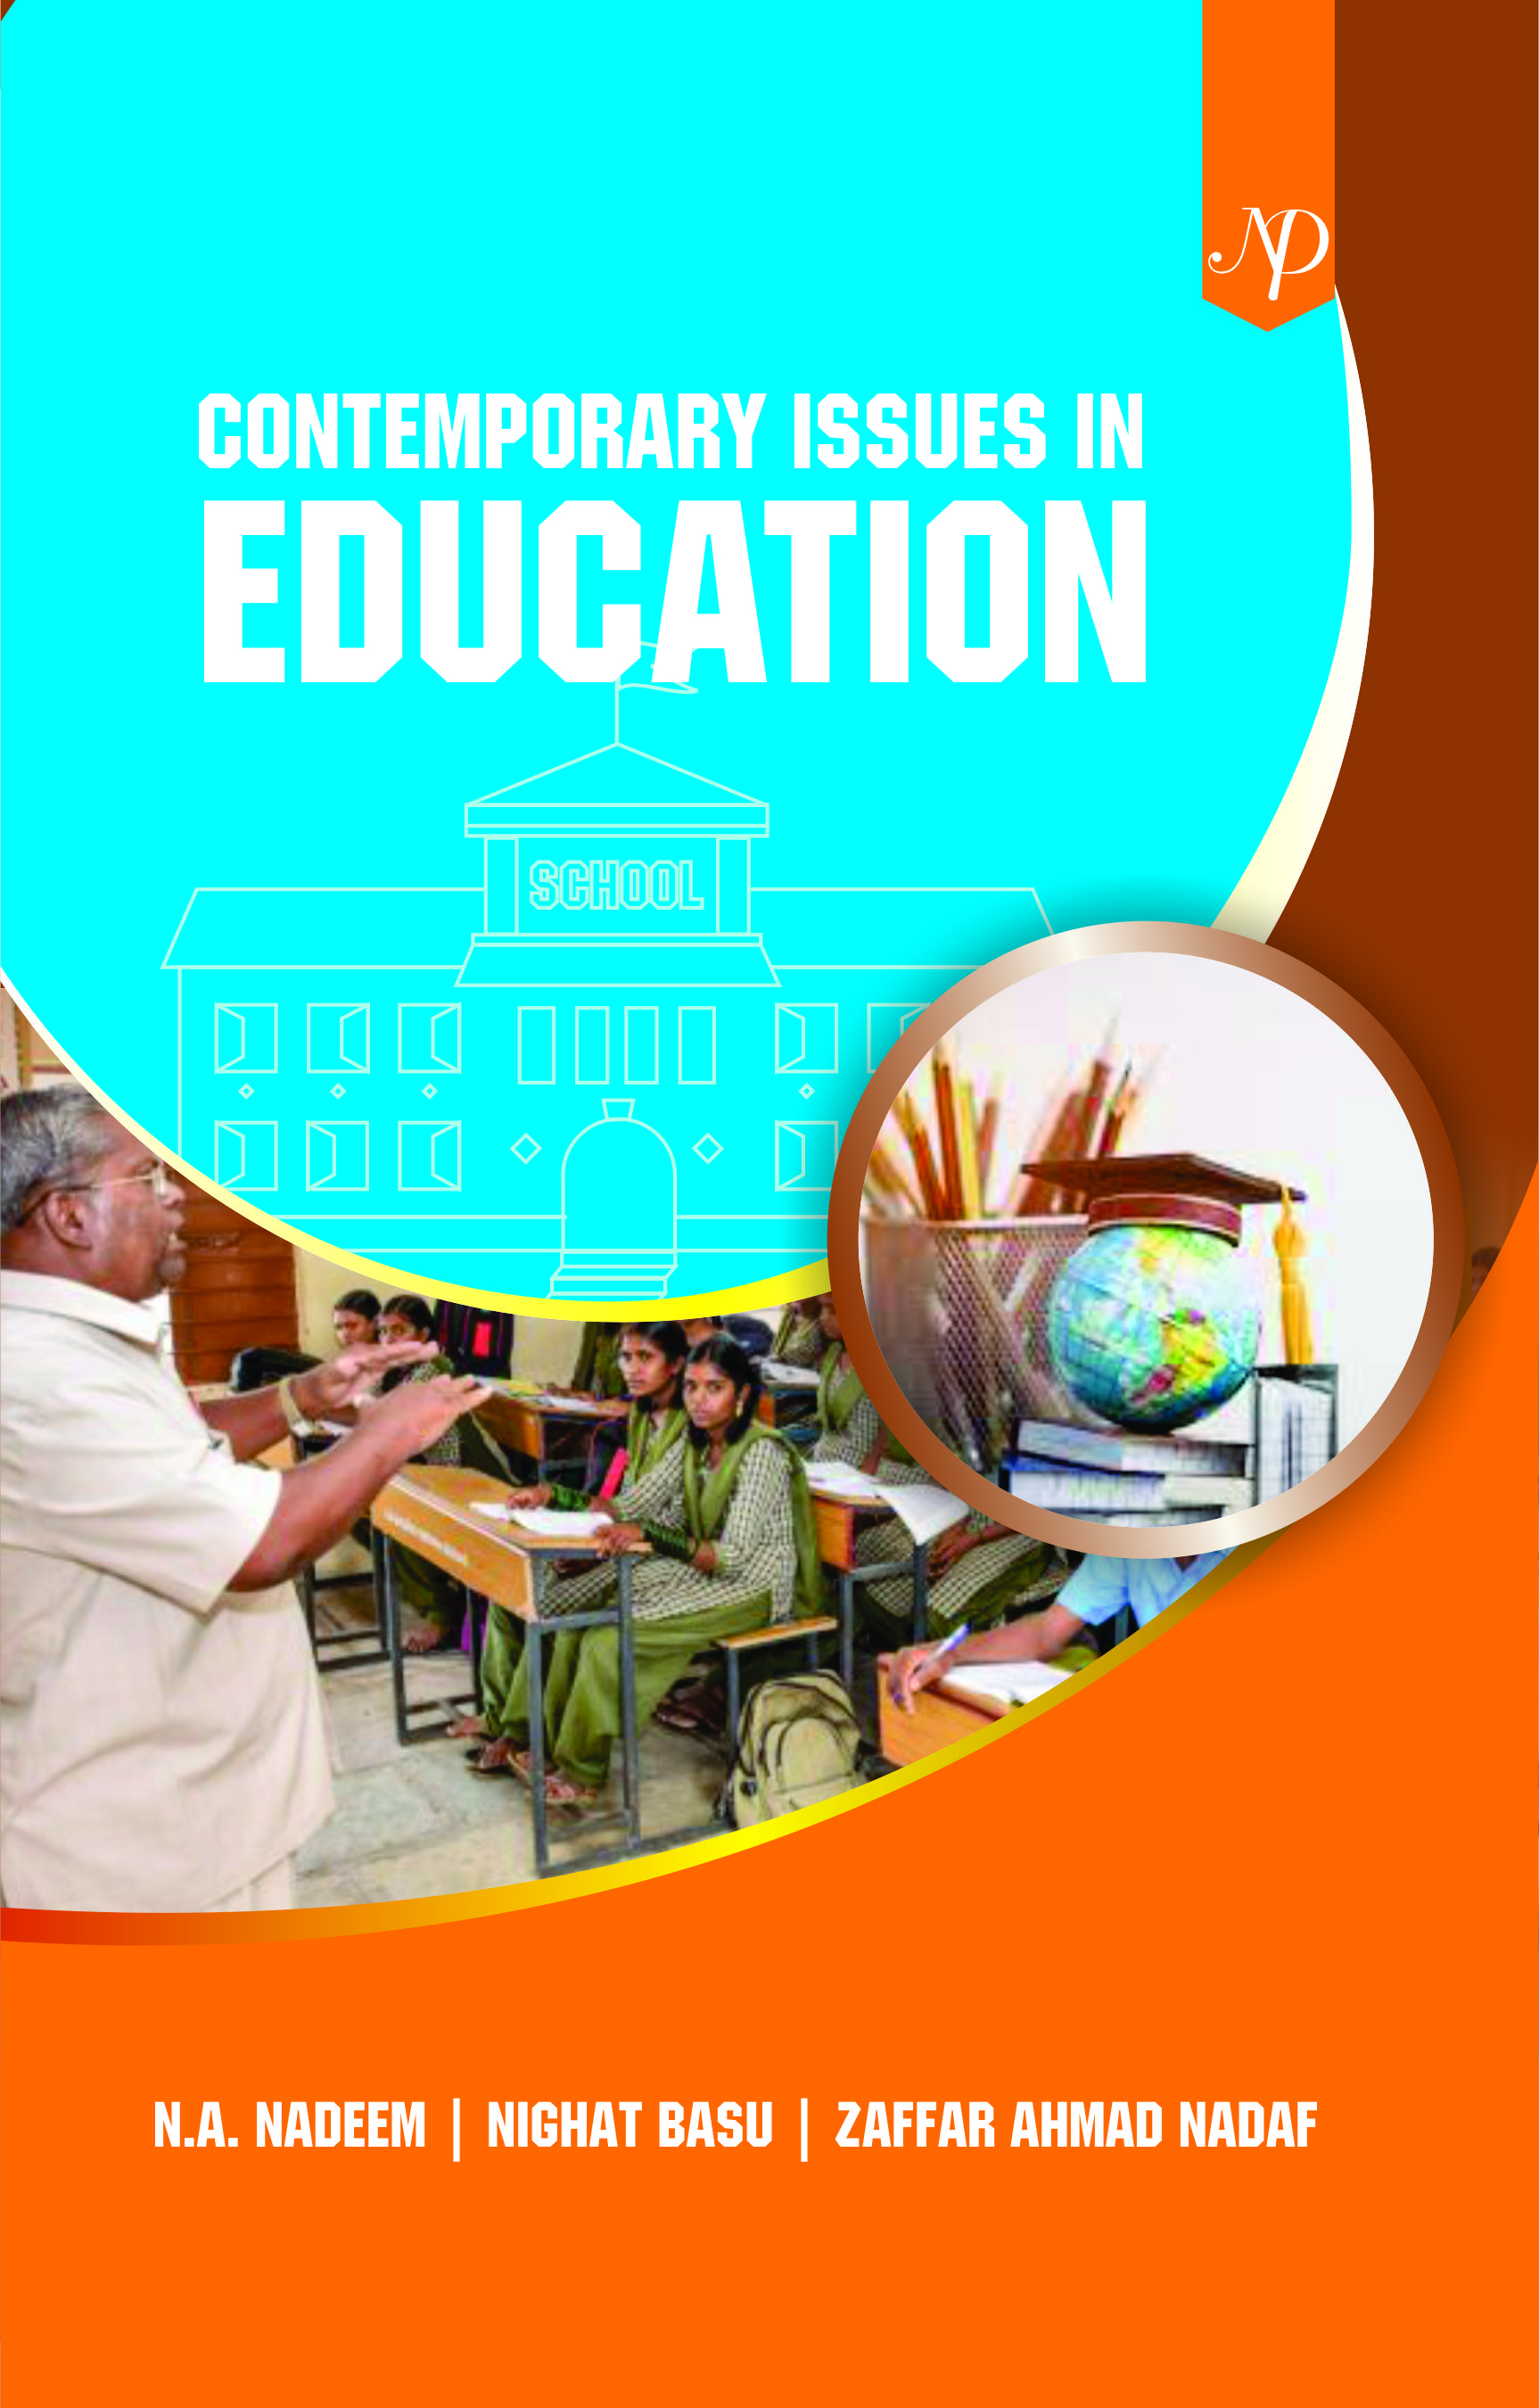 Contemporary issues in Education Cover.jpg